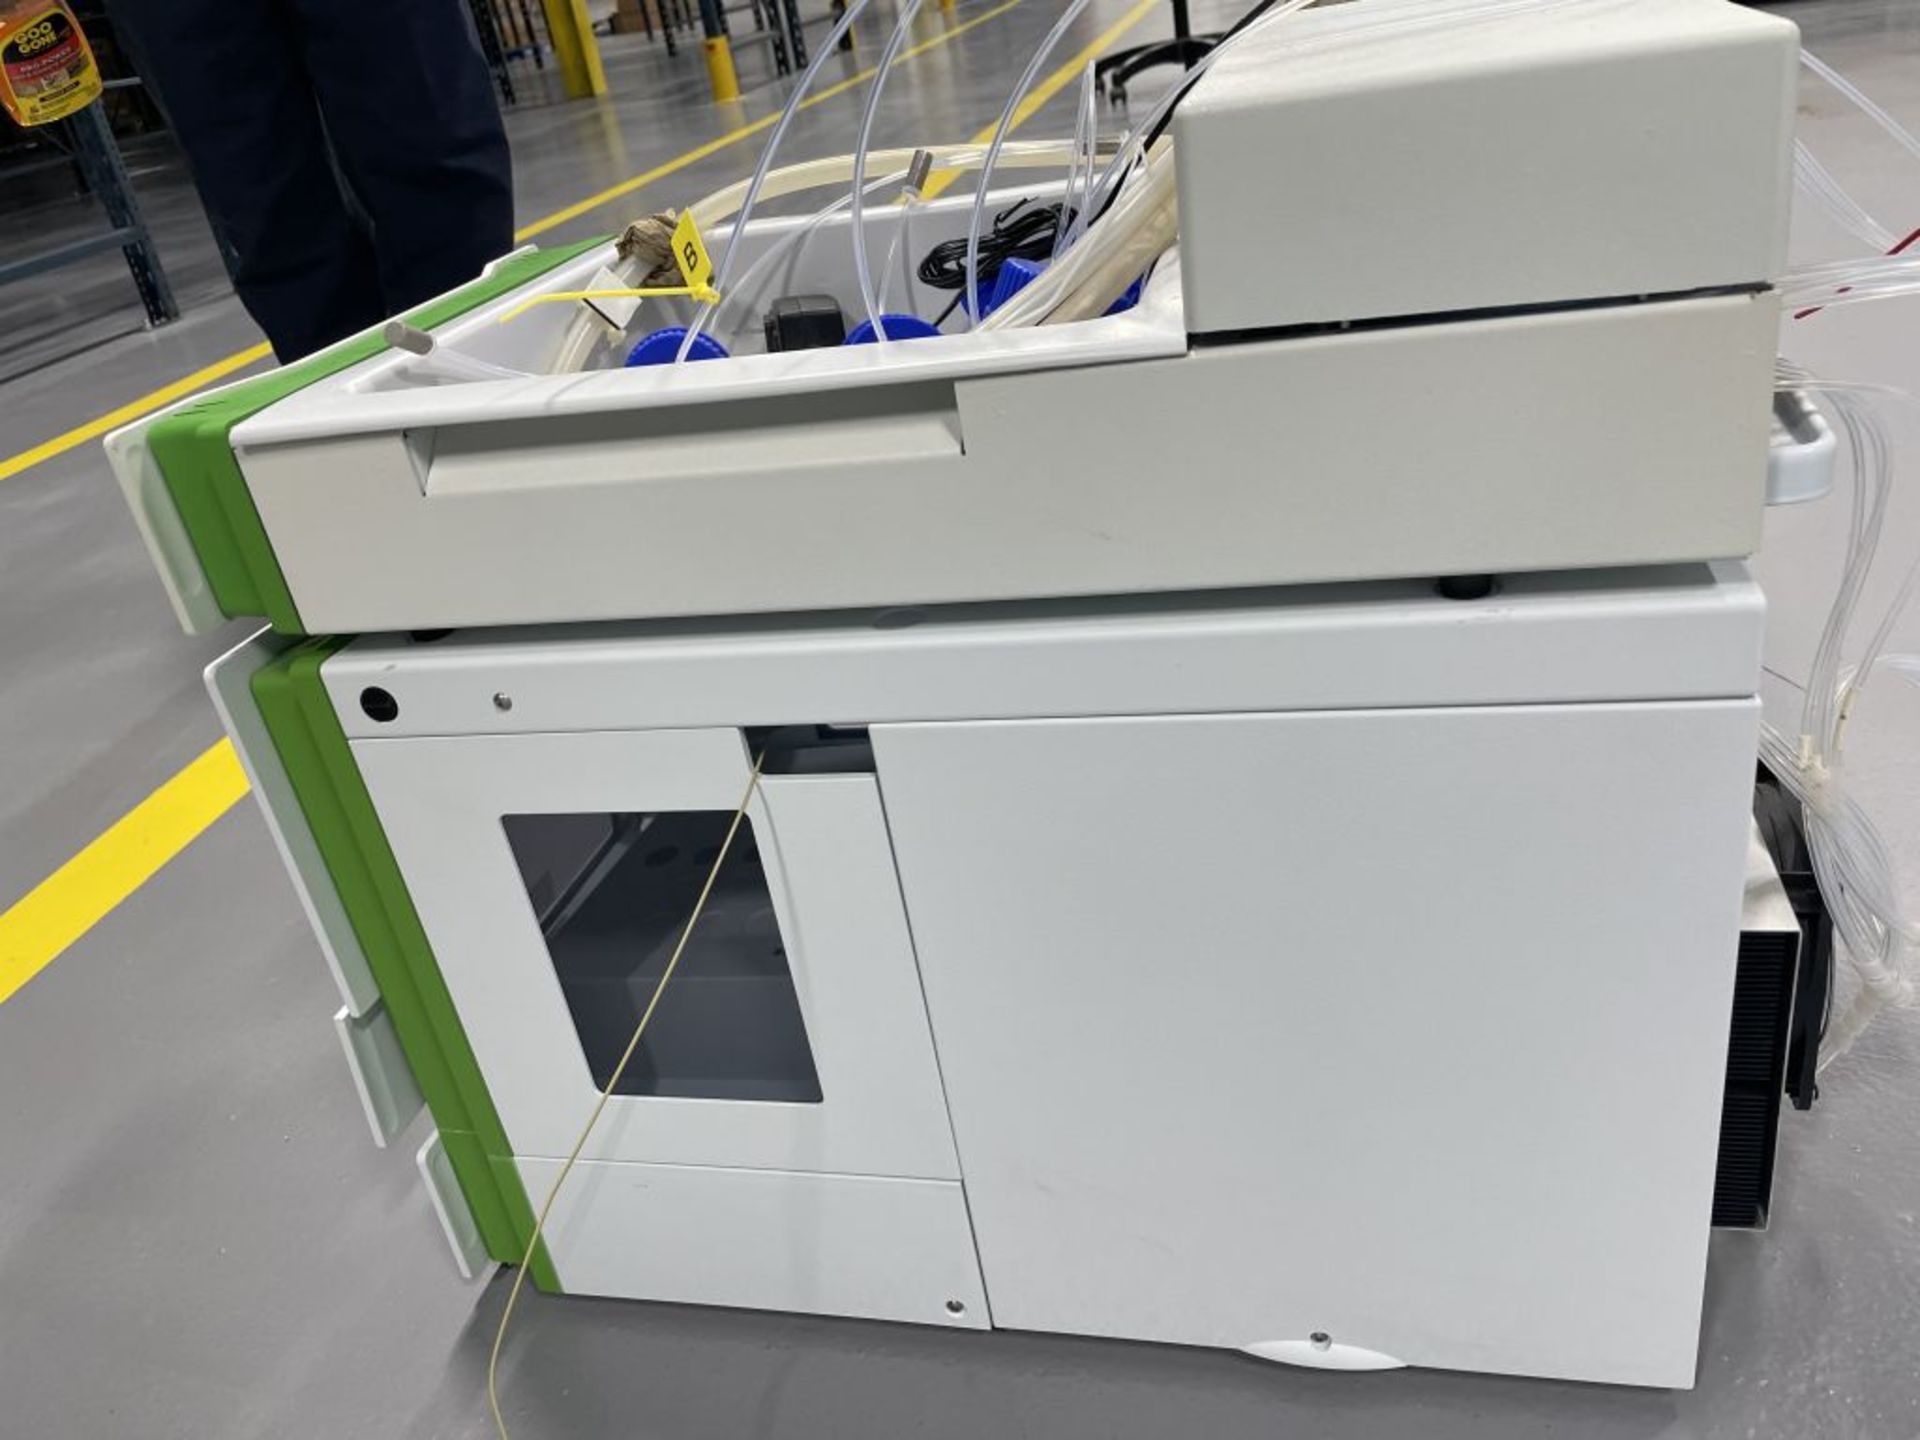 Perkin Elmer UHPLC unit. This is an ultra-high performance chromatography (UHPLC). As shown in - Image 9 of 10